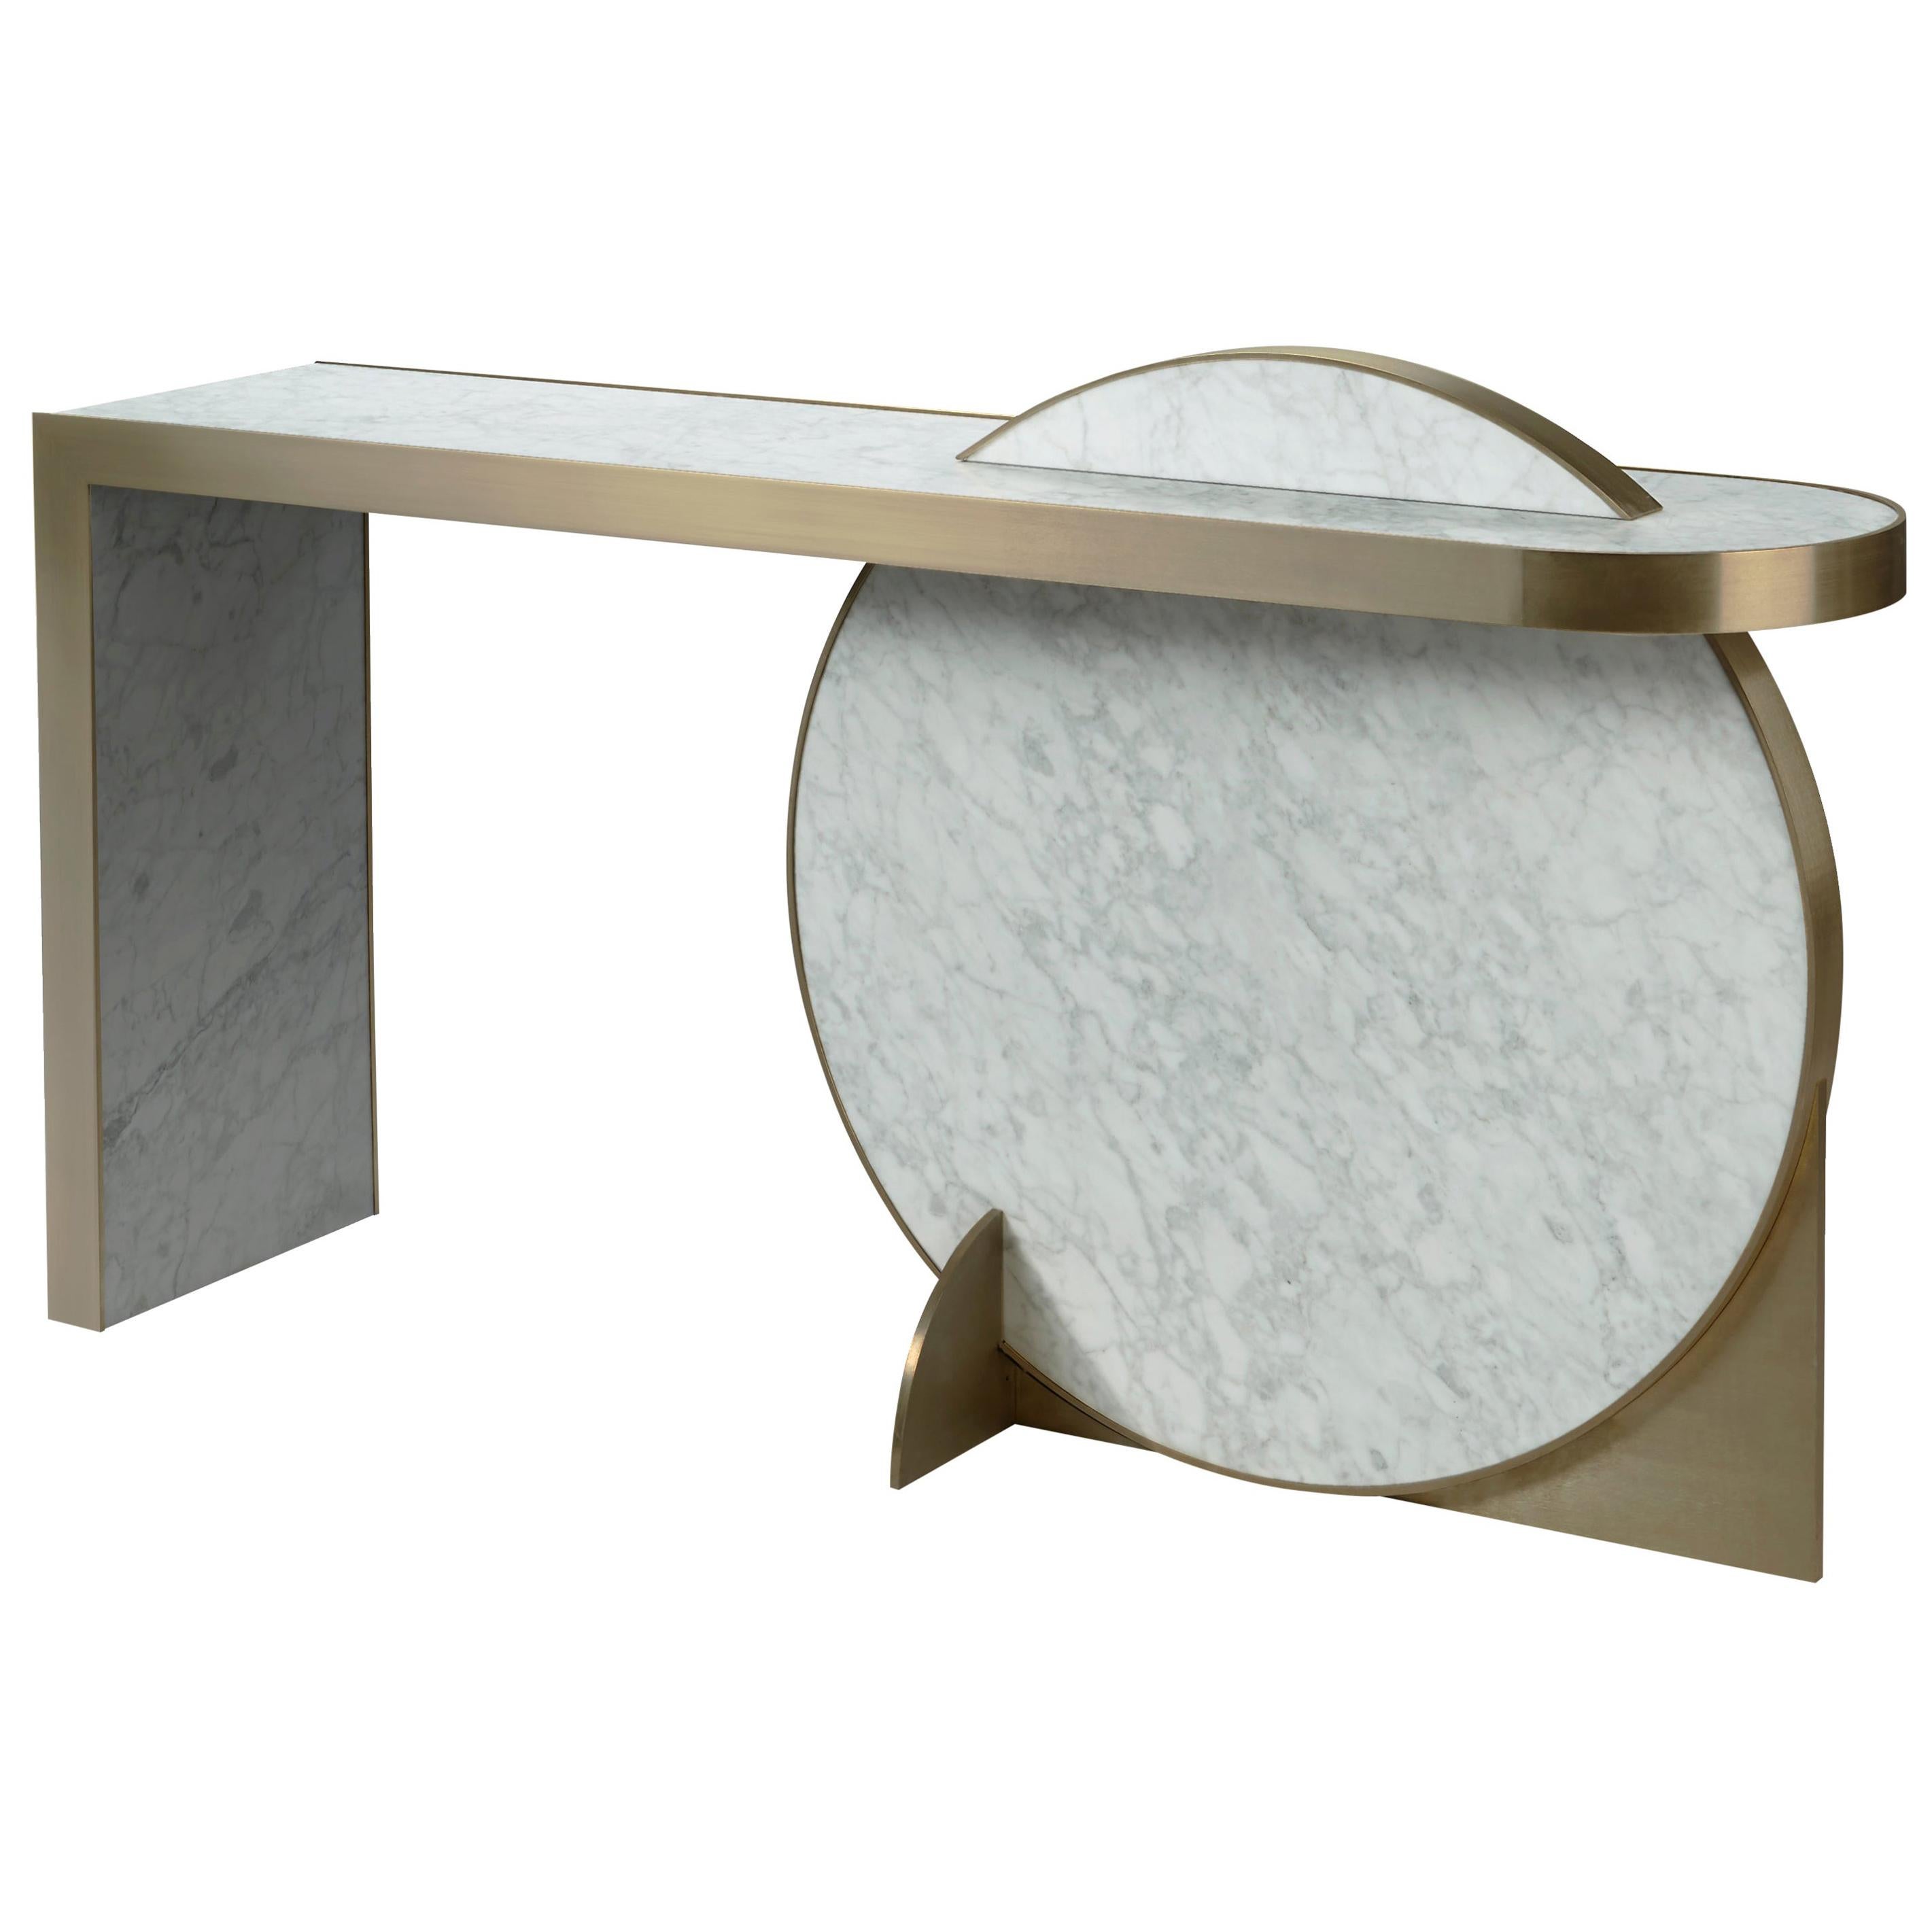 The Collision Console Carrara Marble and Brushed Brass, Snow, by Lara Bohinc